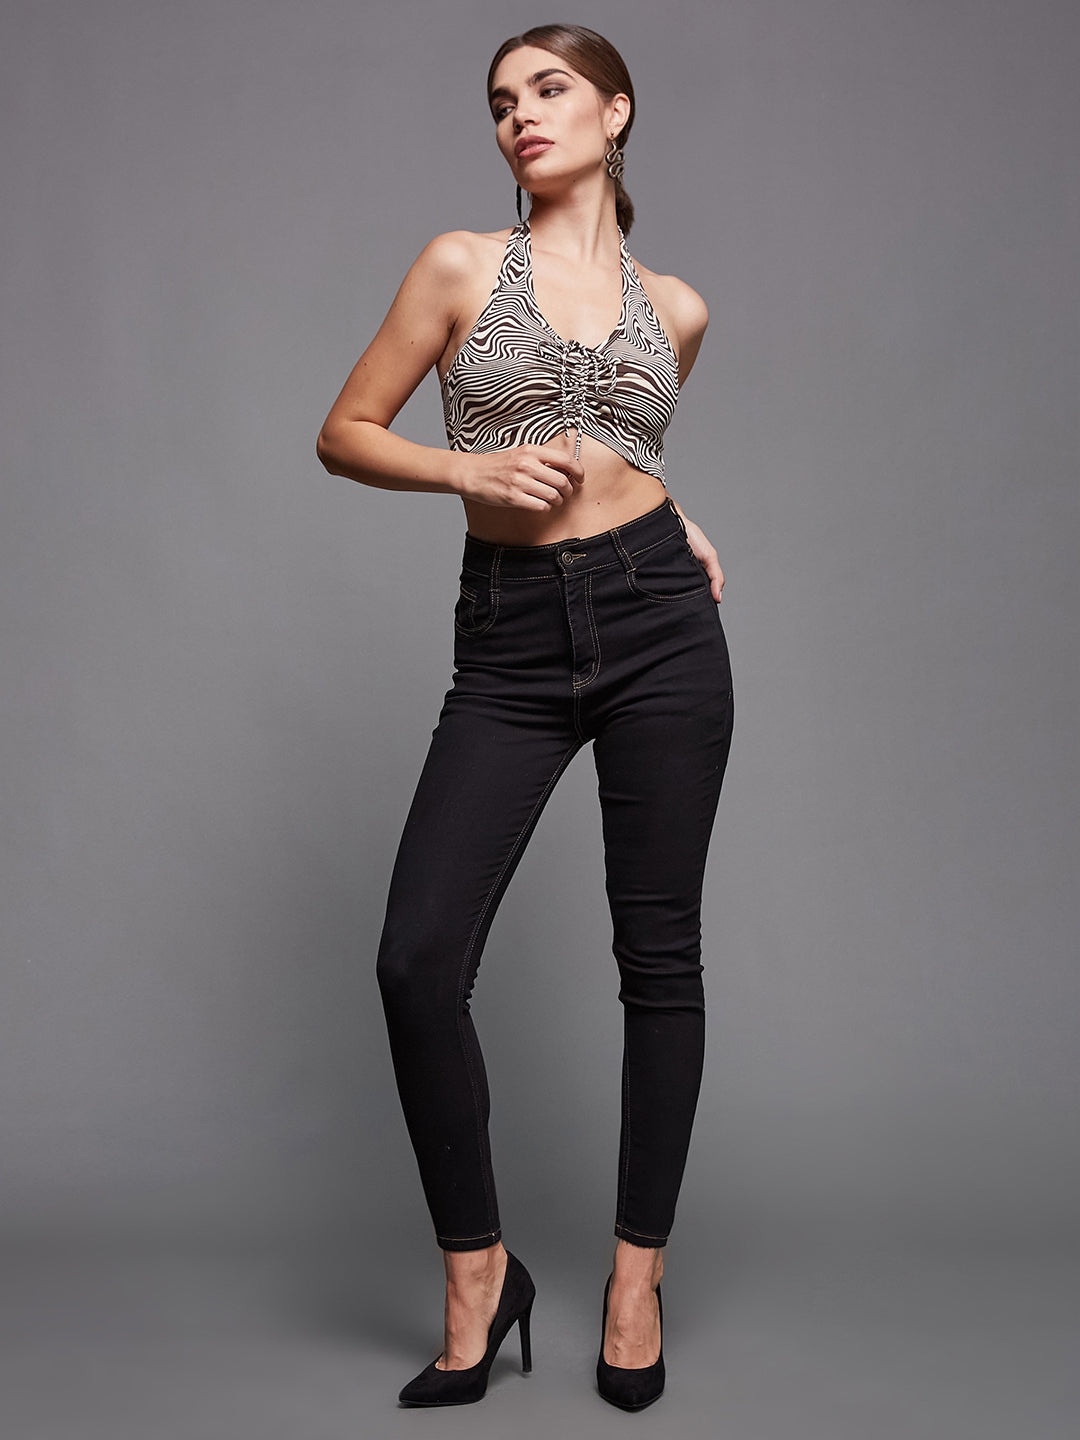 MISS CHASE | Women's Black Solid Skinny Jeans